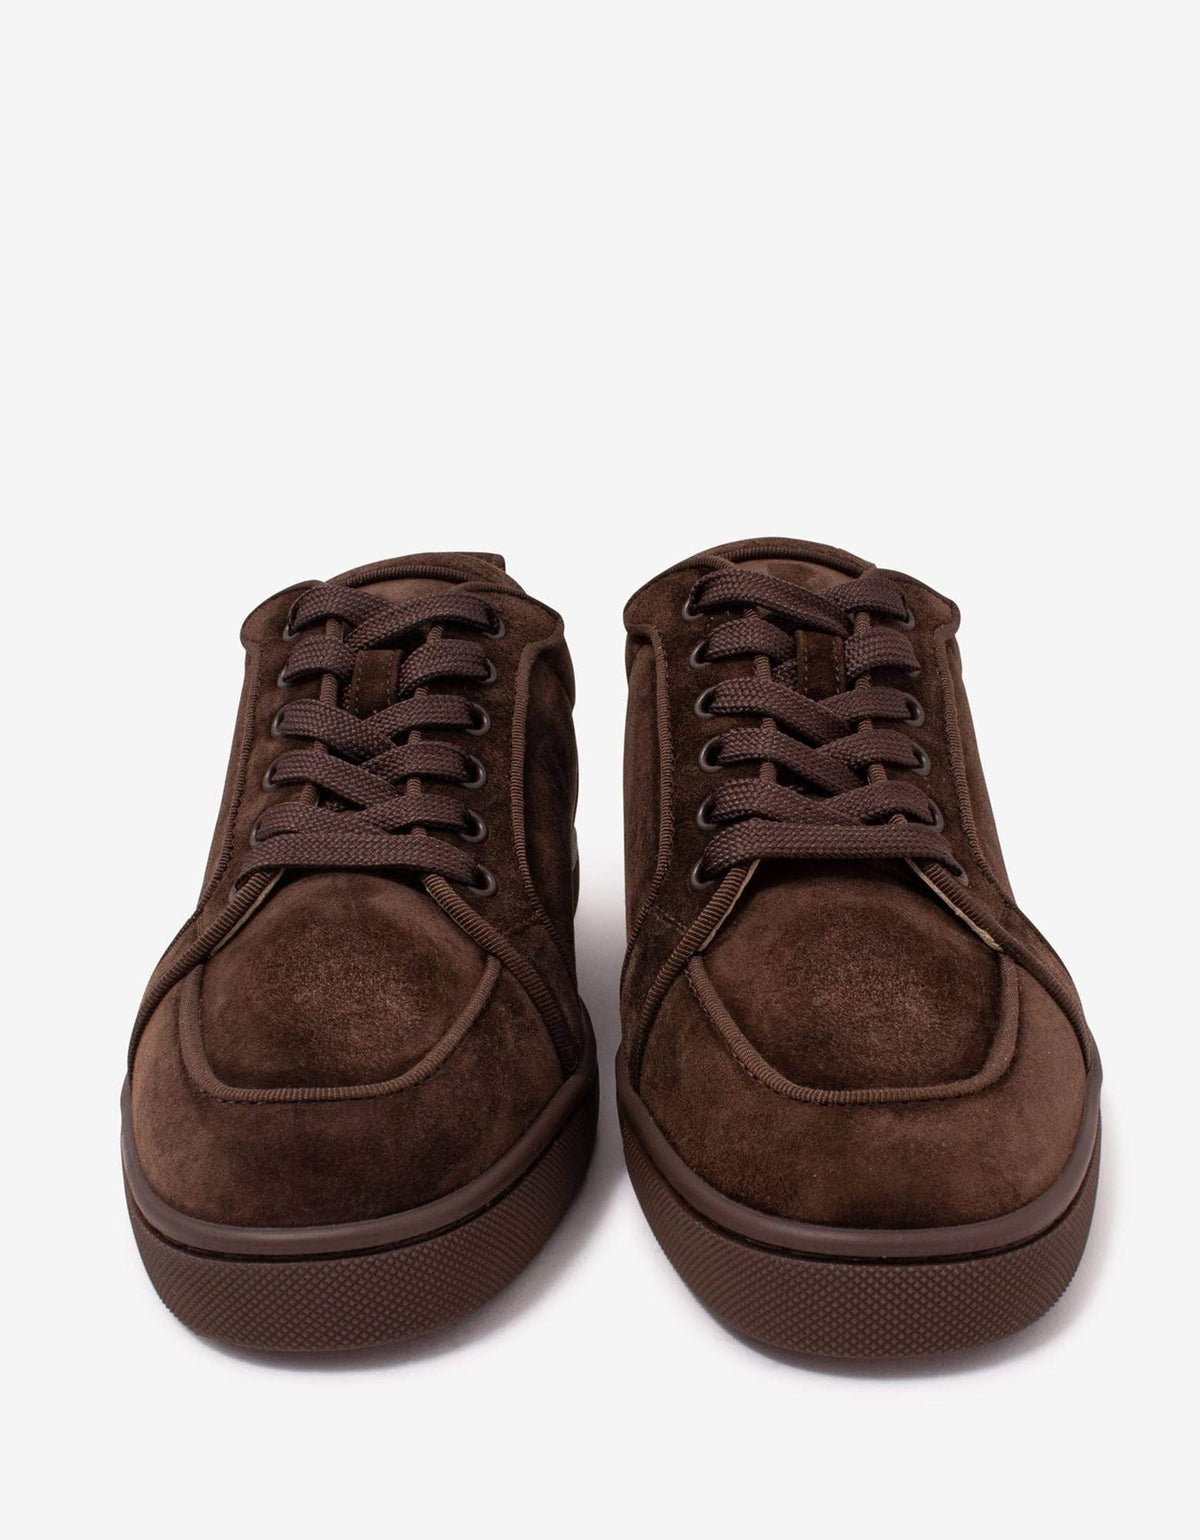 Christian Louboutin Rantulow Orlato Brown Suede Leather Trainers -